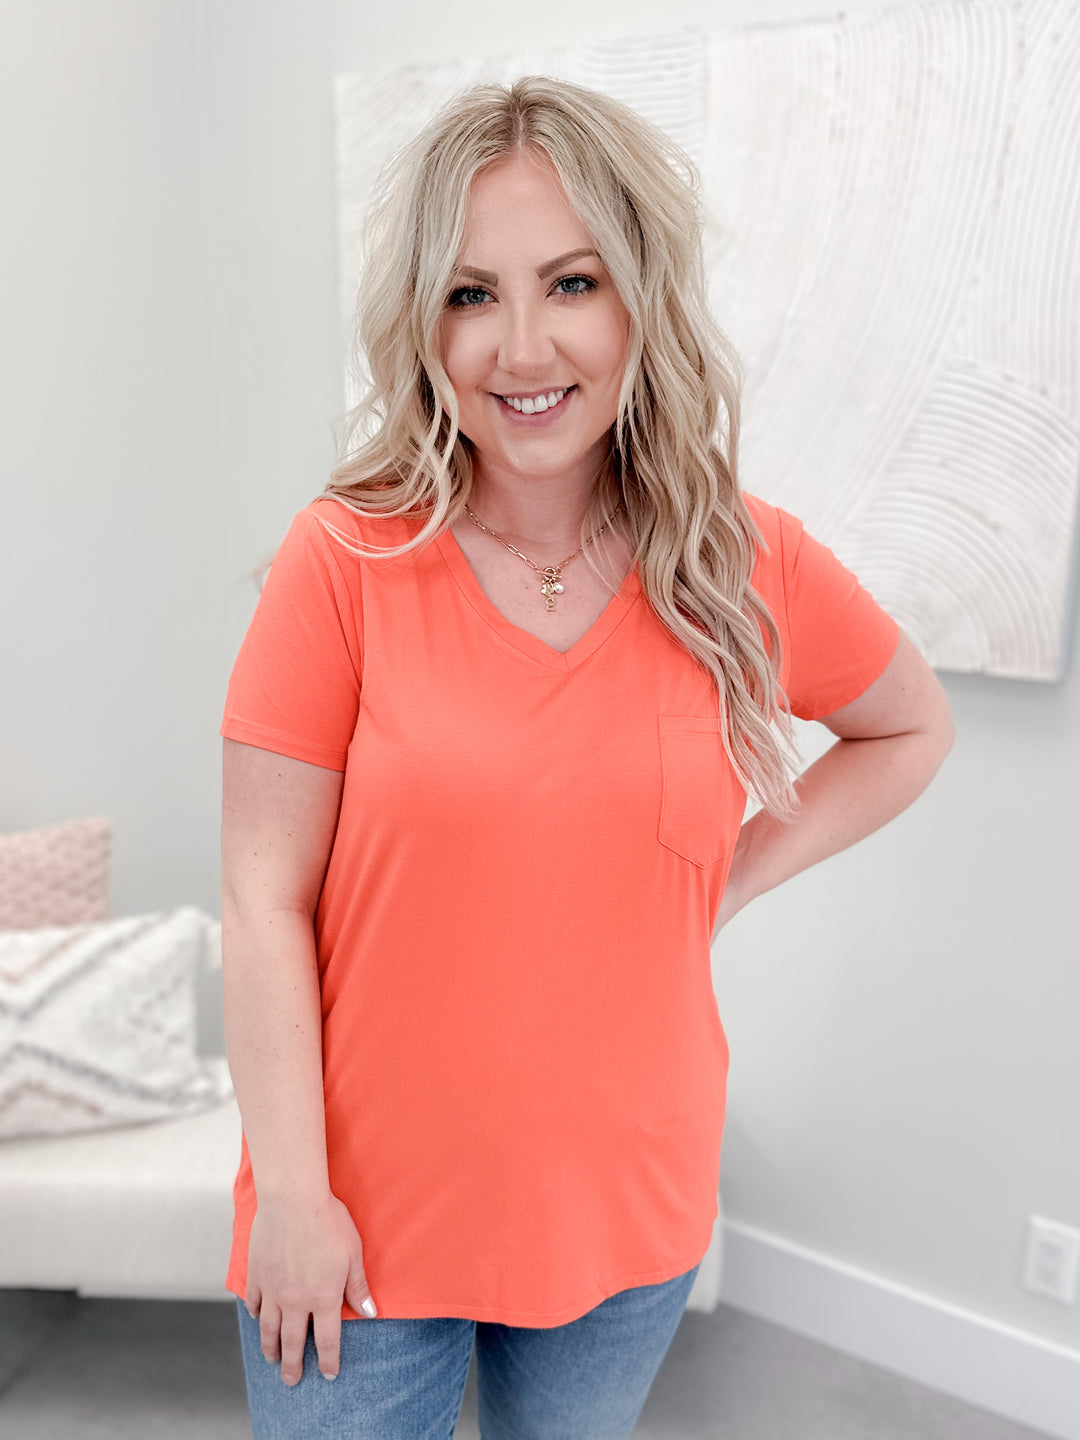 True Fit Perfect Pocket Tee in Apricot by Grace & Lace